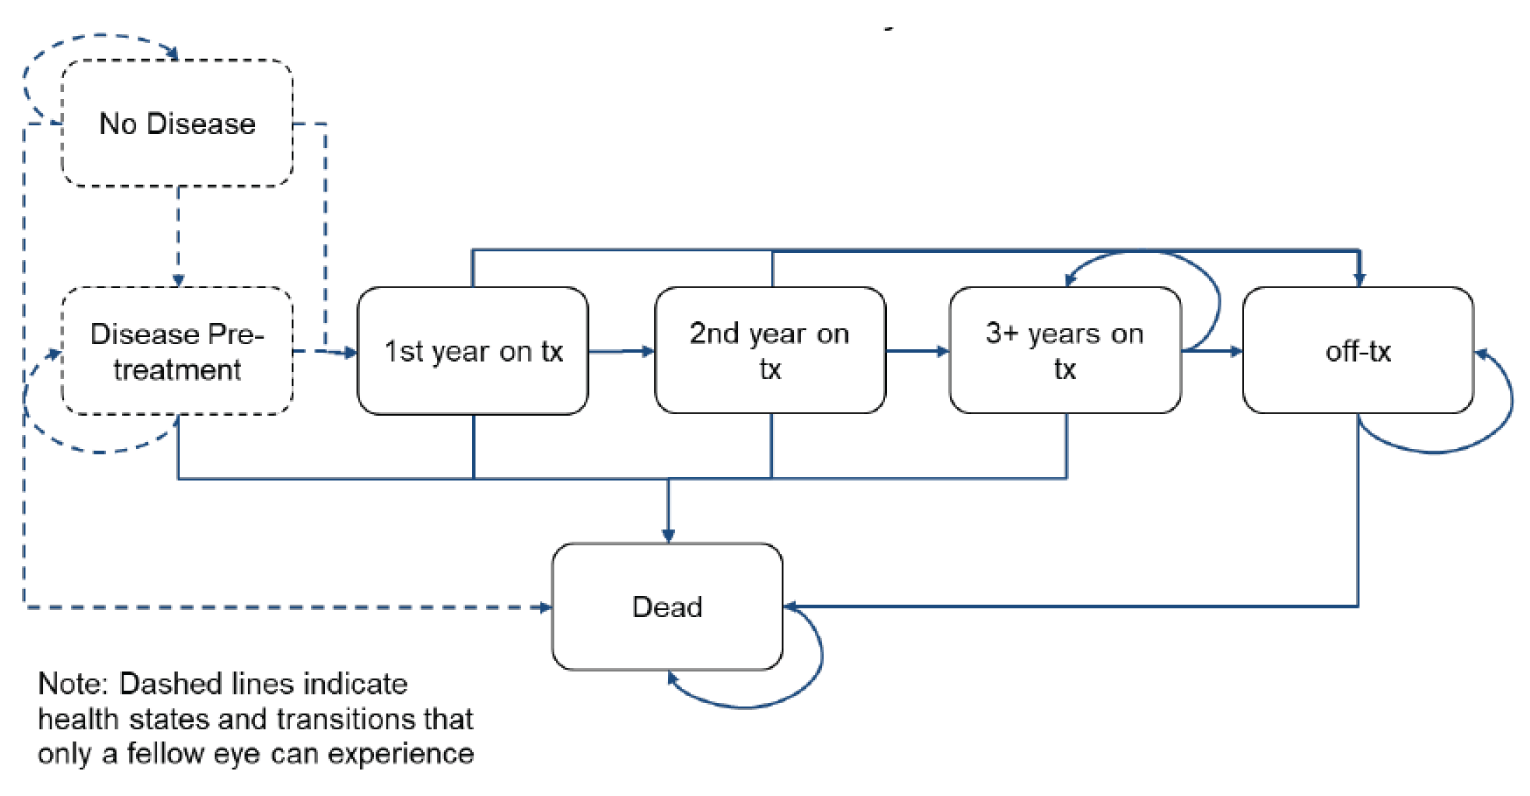 The figure represents how time on treatment is structured within the submitted model.